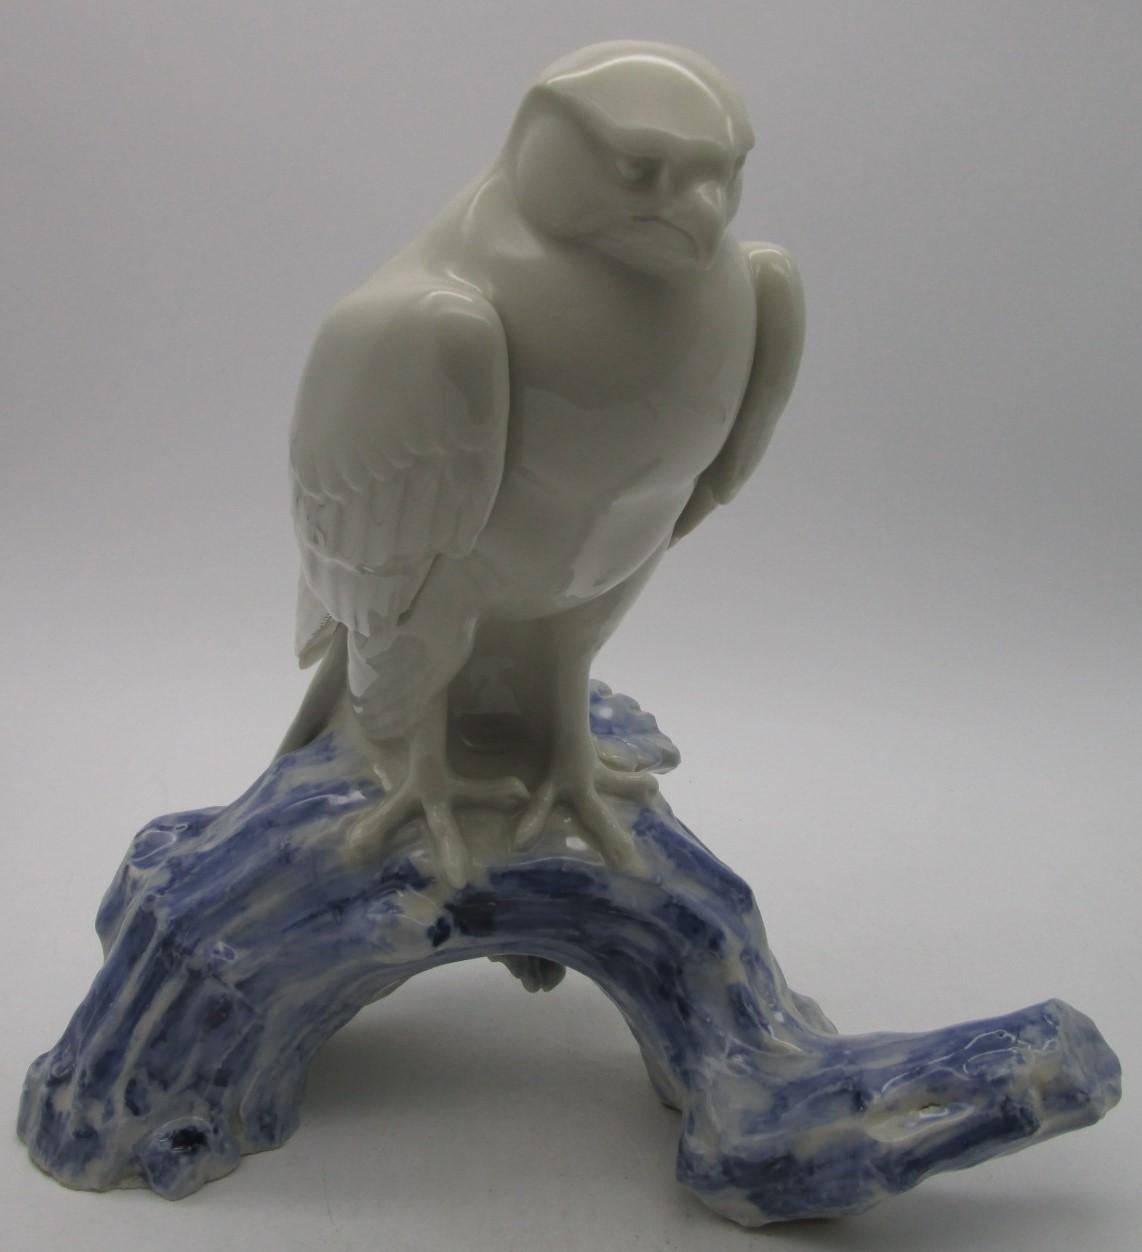 Japanese vintage signed porcelain sculpture from early years of Showa period (1926-1989,) dramatically showcasing an eagle resting on a branch. The branch is hand-painted in cobalt blue on white to create the details of the branch. The artist's